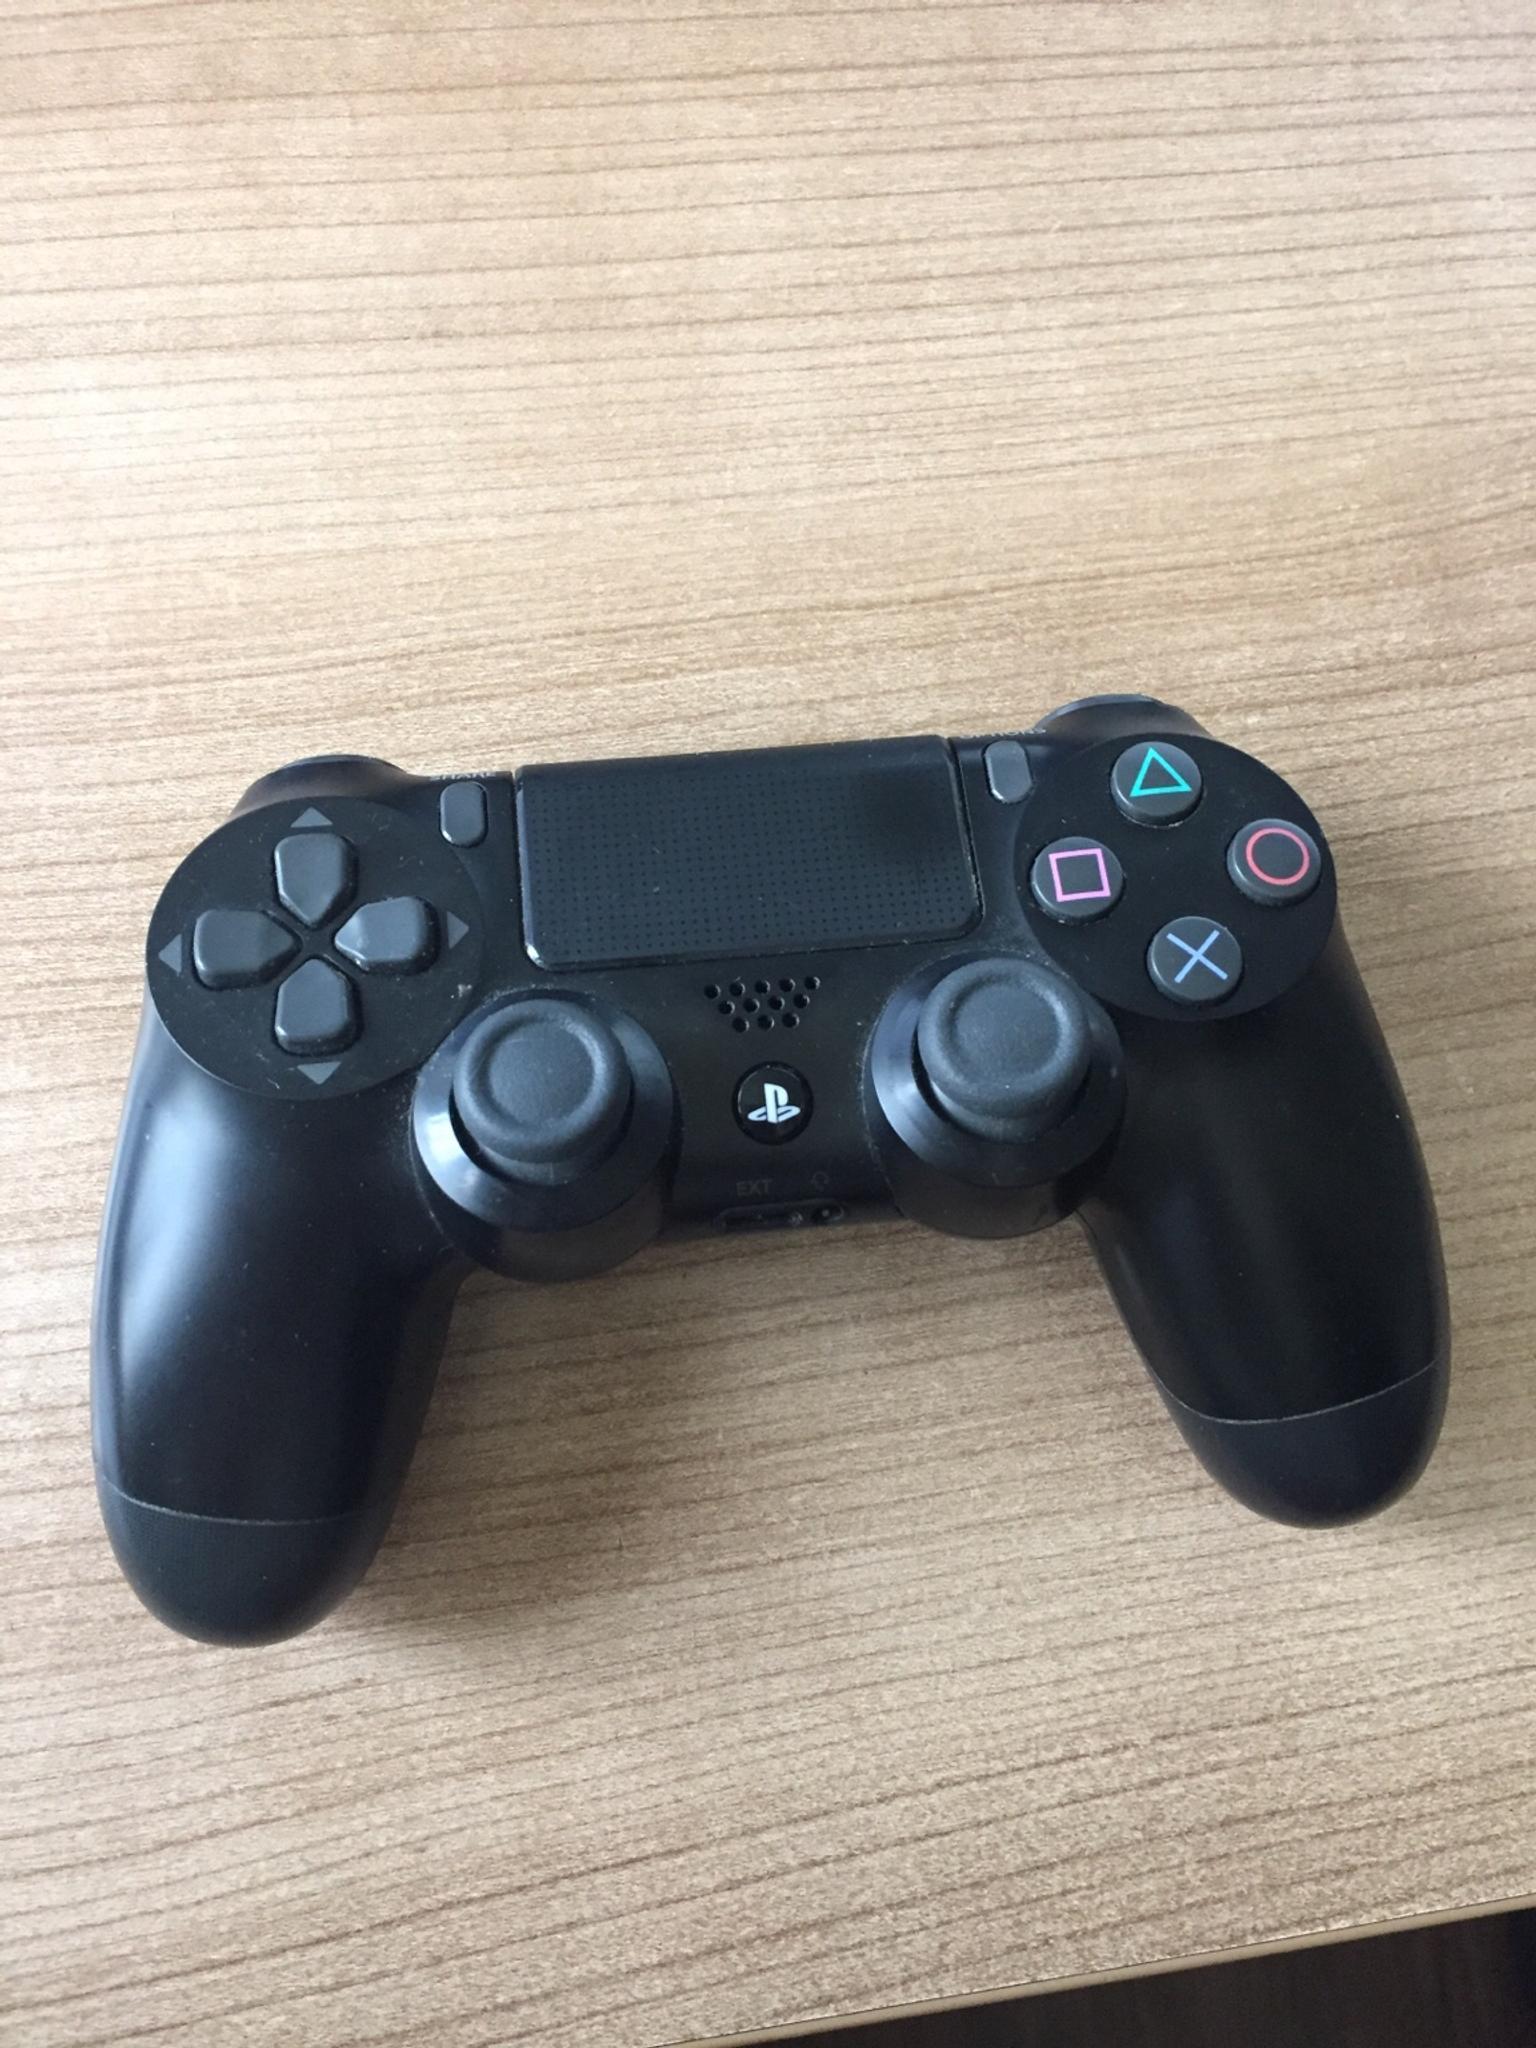 2nd hand ps4